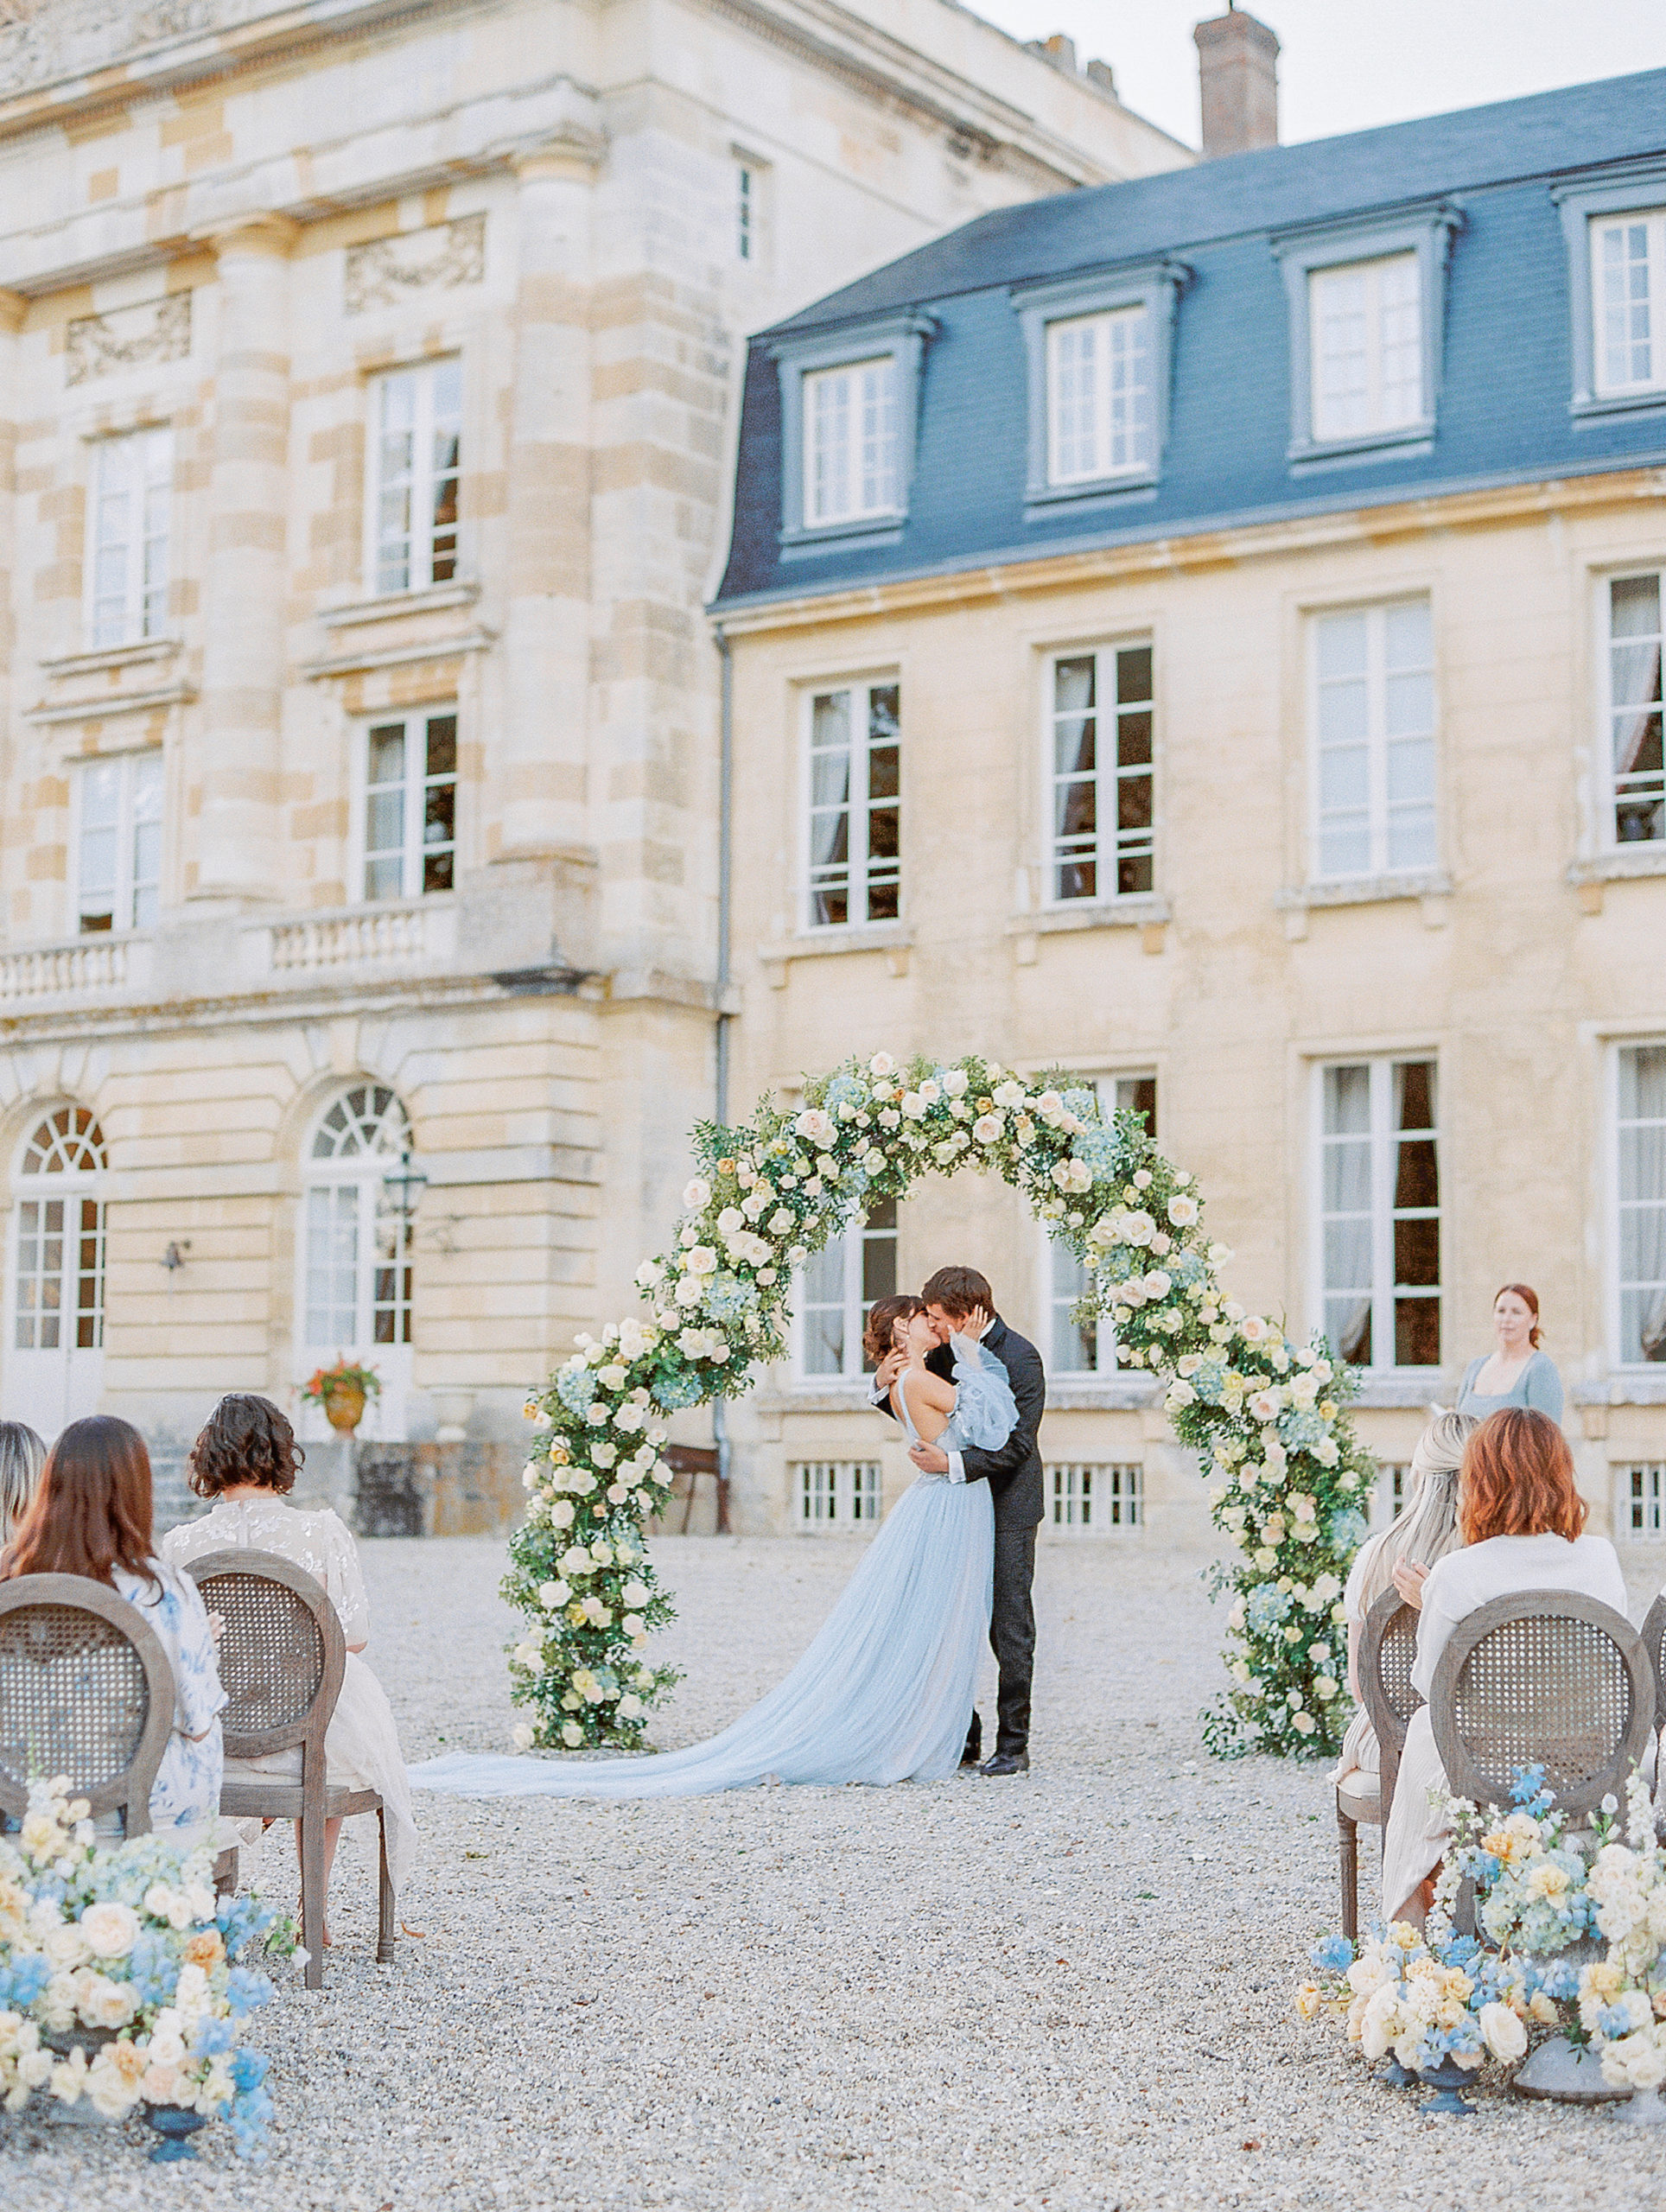 Bride and Groom First Kiss at Chateau de Courtomer Wedding